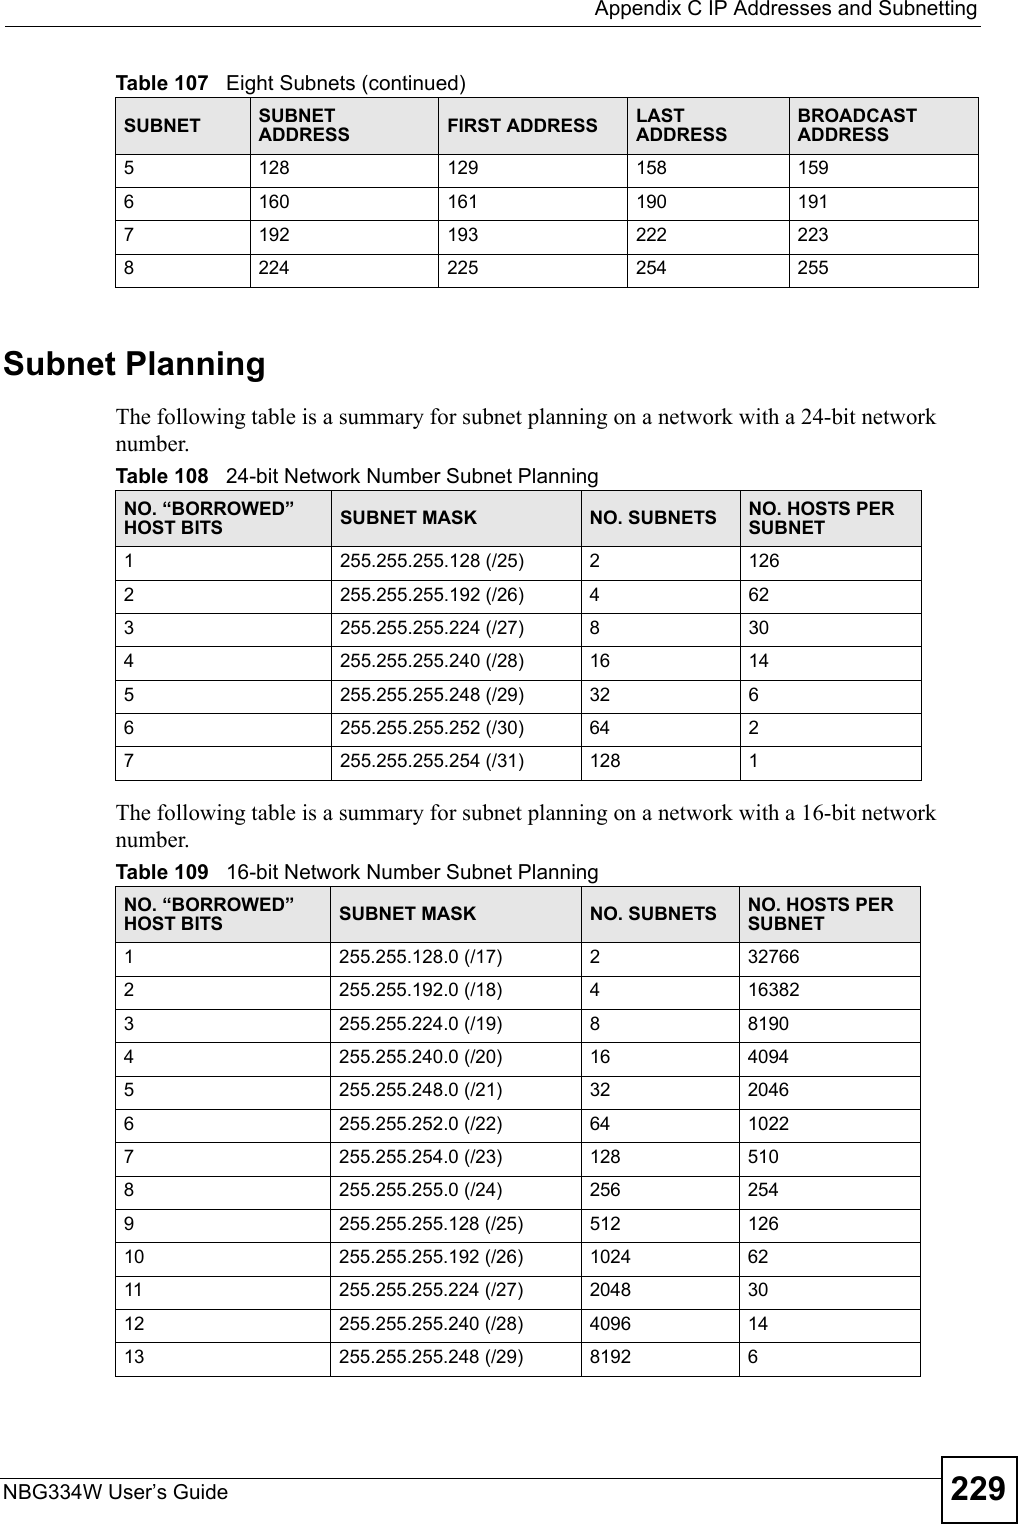  Appendix C IP Addresses and SubnettingNBG334W User’s Guide 229Subnet PlanningThe following table is a summary for subnet planning on a network with a 24-bit network number.The following table is a summary for subnet planning on a network with a 16-bit network number. 5128 129 158 1596160 161 190 1917192 193 222 2238224 225 254 255Table 107   Eight Subnets (continued)SUBNET SUBNET ADDRESS FIRST ADDRESS LAST ADDRESSBROADCAST ADDRESSTable 108   24-bit Network Number Subnet PlanningNO. “BORROWED” HOST BITS SUBNET MASK NO. SUBNETS NO. HOSTS PER SUBNET1255.255.255.128 (/25) 21262255.255.255.192 (/26) 4623255.255.255.224 (/27) 8304255.255.255.240 (/28) 16 145255.255.255.248 (/29) 32 66255.255.255.252 (/30) 64 27255.255.255.254 (/31) 128 1Table 109   16-bit Network Number Subnet PlanningNO. “BORROWED” HOST BITS SUBNET MASK NO. SUBNETS NO. HOSTS PER SUBNET1255.255.128.0 (/17) 2327662255.255.192.0 (/18) 4163823255.255.224.0 (/19) 881904255.255.240.0 (/20) 16 40945255.255.248.0 (/21) 32 20466255.255.252.0 (/22) 64 10227255.255.254.0 (/23) 128 5108255.255.255.0 (/24) 256 2549255.255.255.128 (/25) 512 12610 255.255.255.192 (/26) 1024 6211 255.255.255.224 (/27) 2048 3012 255.255.255.240 (/28) 4096 1413 255.255.255.248 (/29) 8192 6